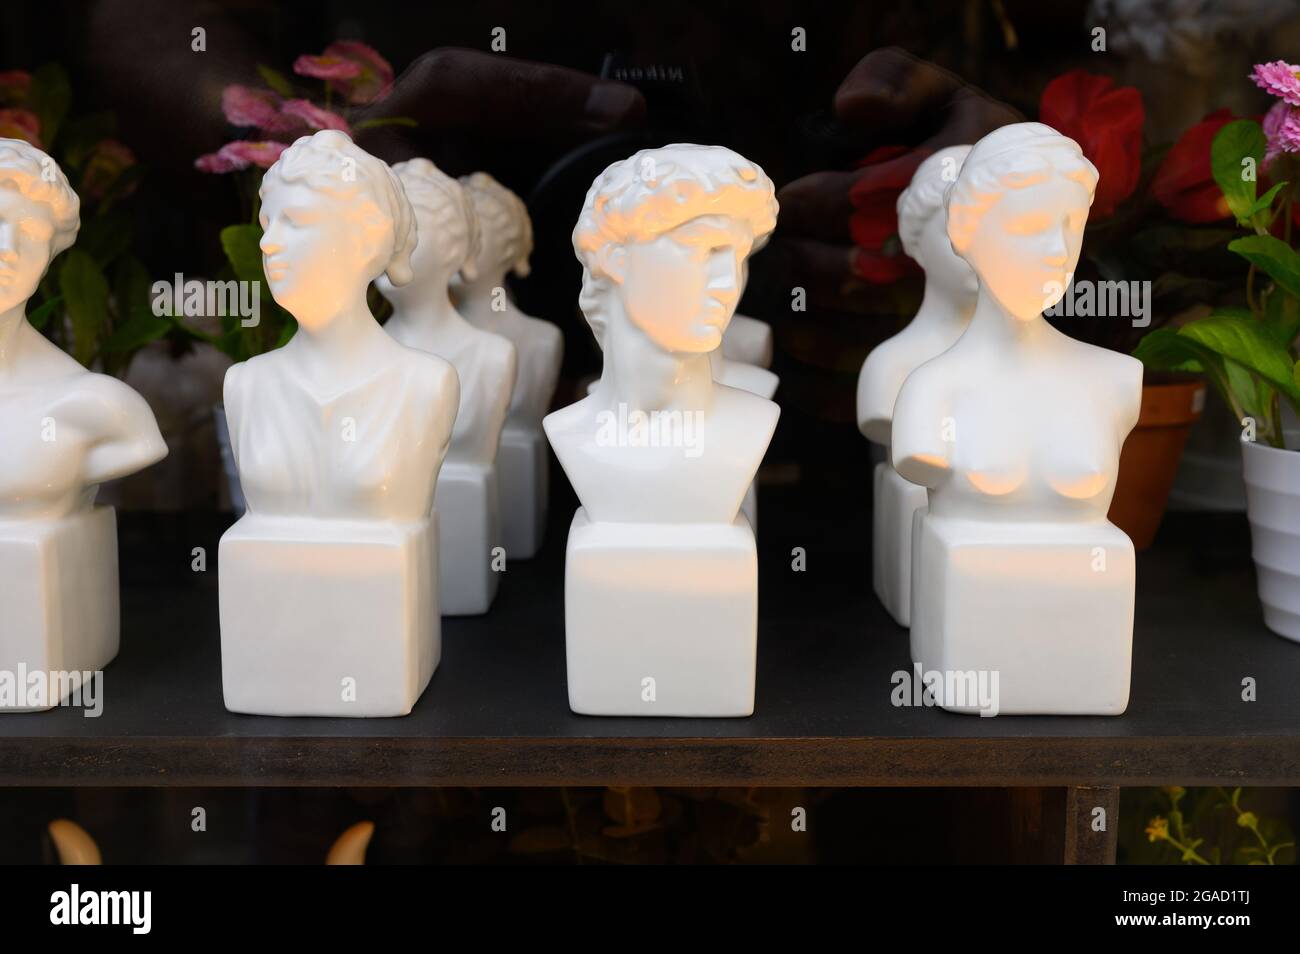 Miniature ceramic busts in a shop window. Stock Photo